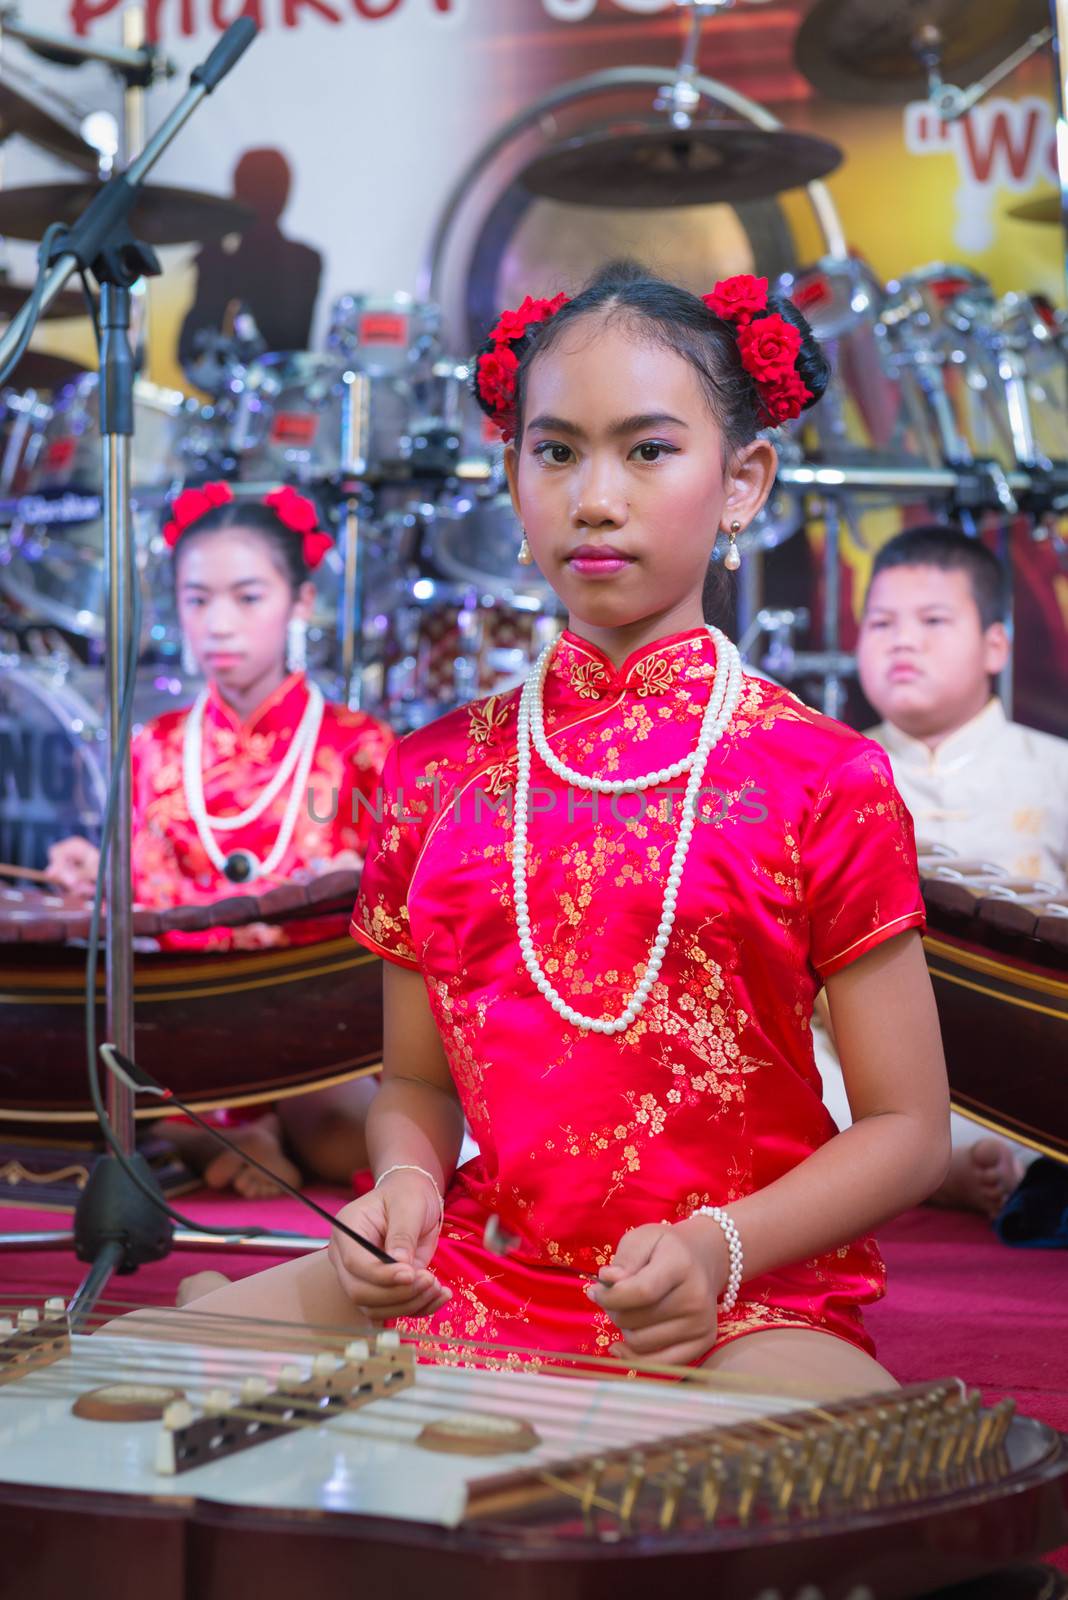 PHUKET, THAILAND - 07 FEB 2014: Unidentified musician(s) play on a stage during annual old Phuket town festival. 